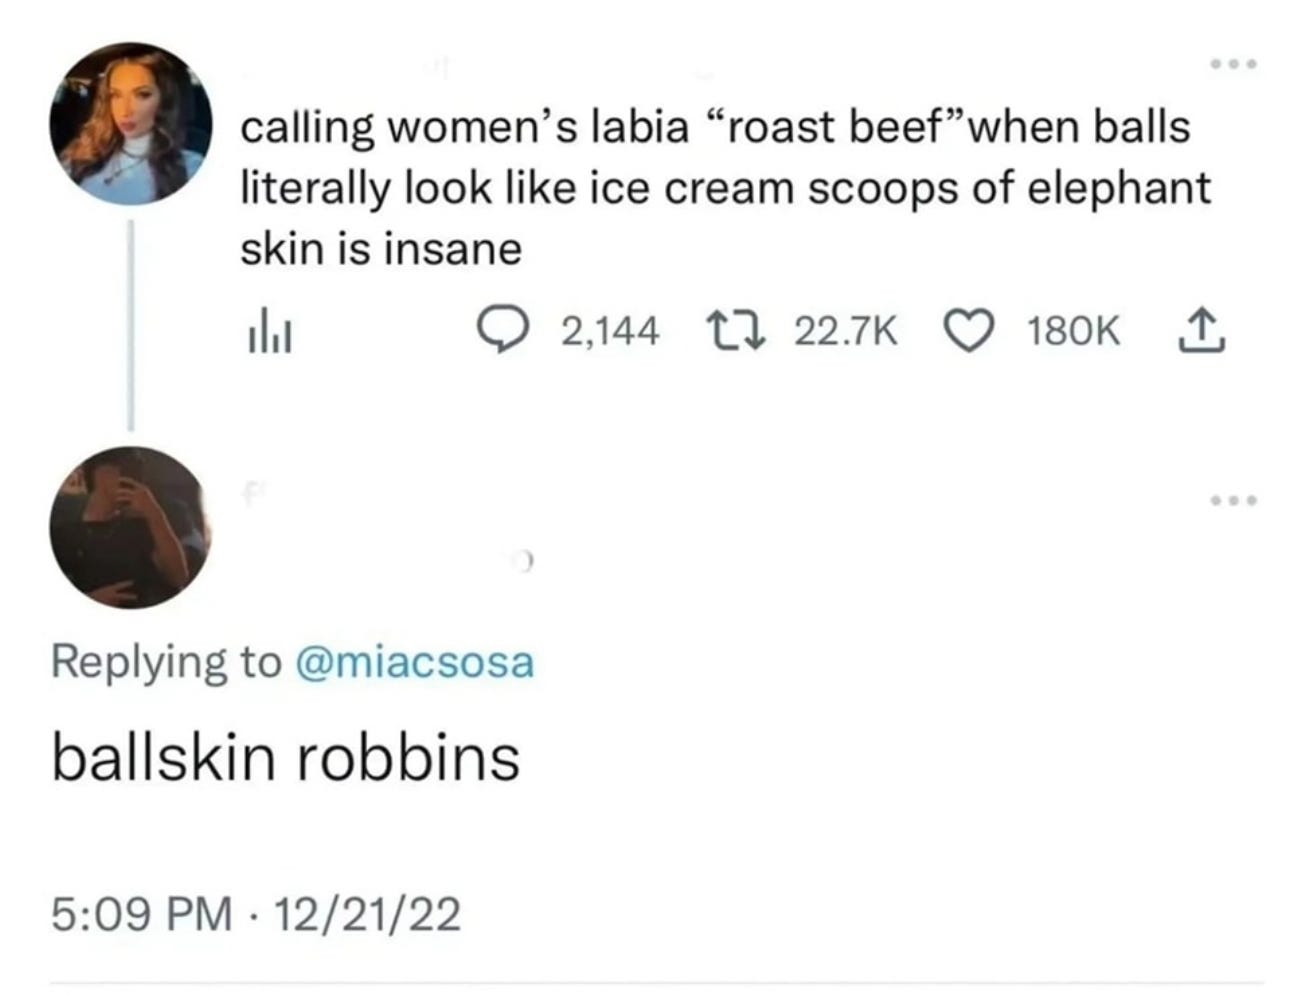 A tweet and reply that read: Calling women's labia "roast beef" when balls literally look like ice cream scoops of elephant skin is insane - ballskin robbins